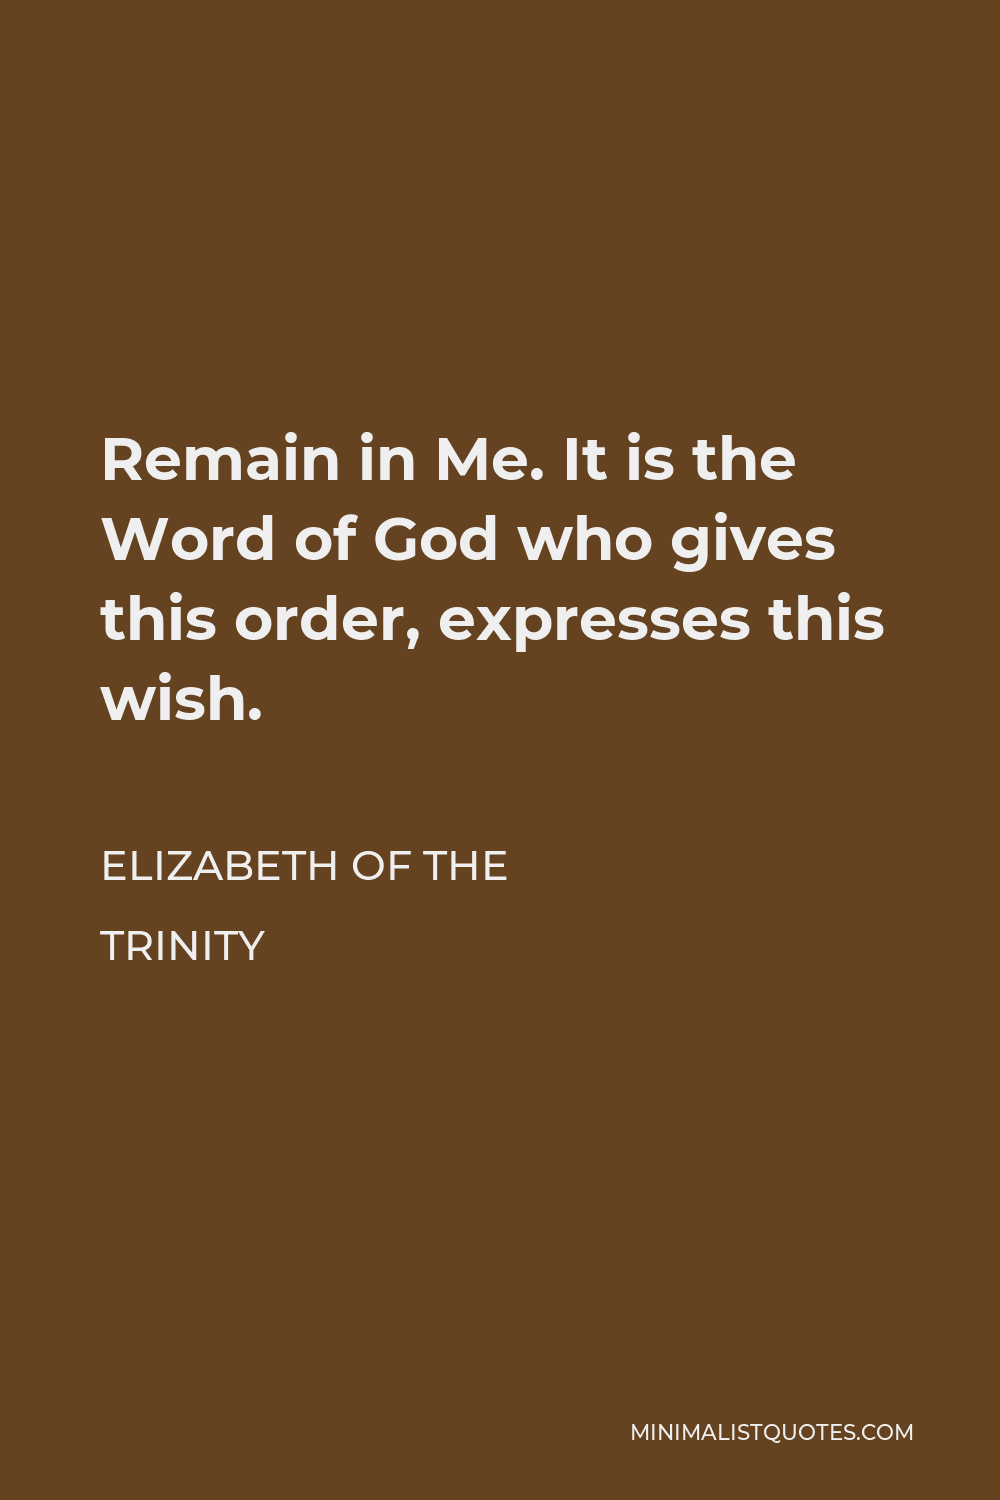 Elizabeth of the Trinity Quote - Remain in Me. It is the Word of God who gives this order, expresses this wish.